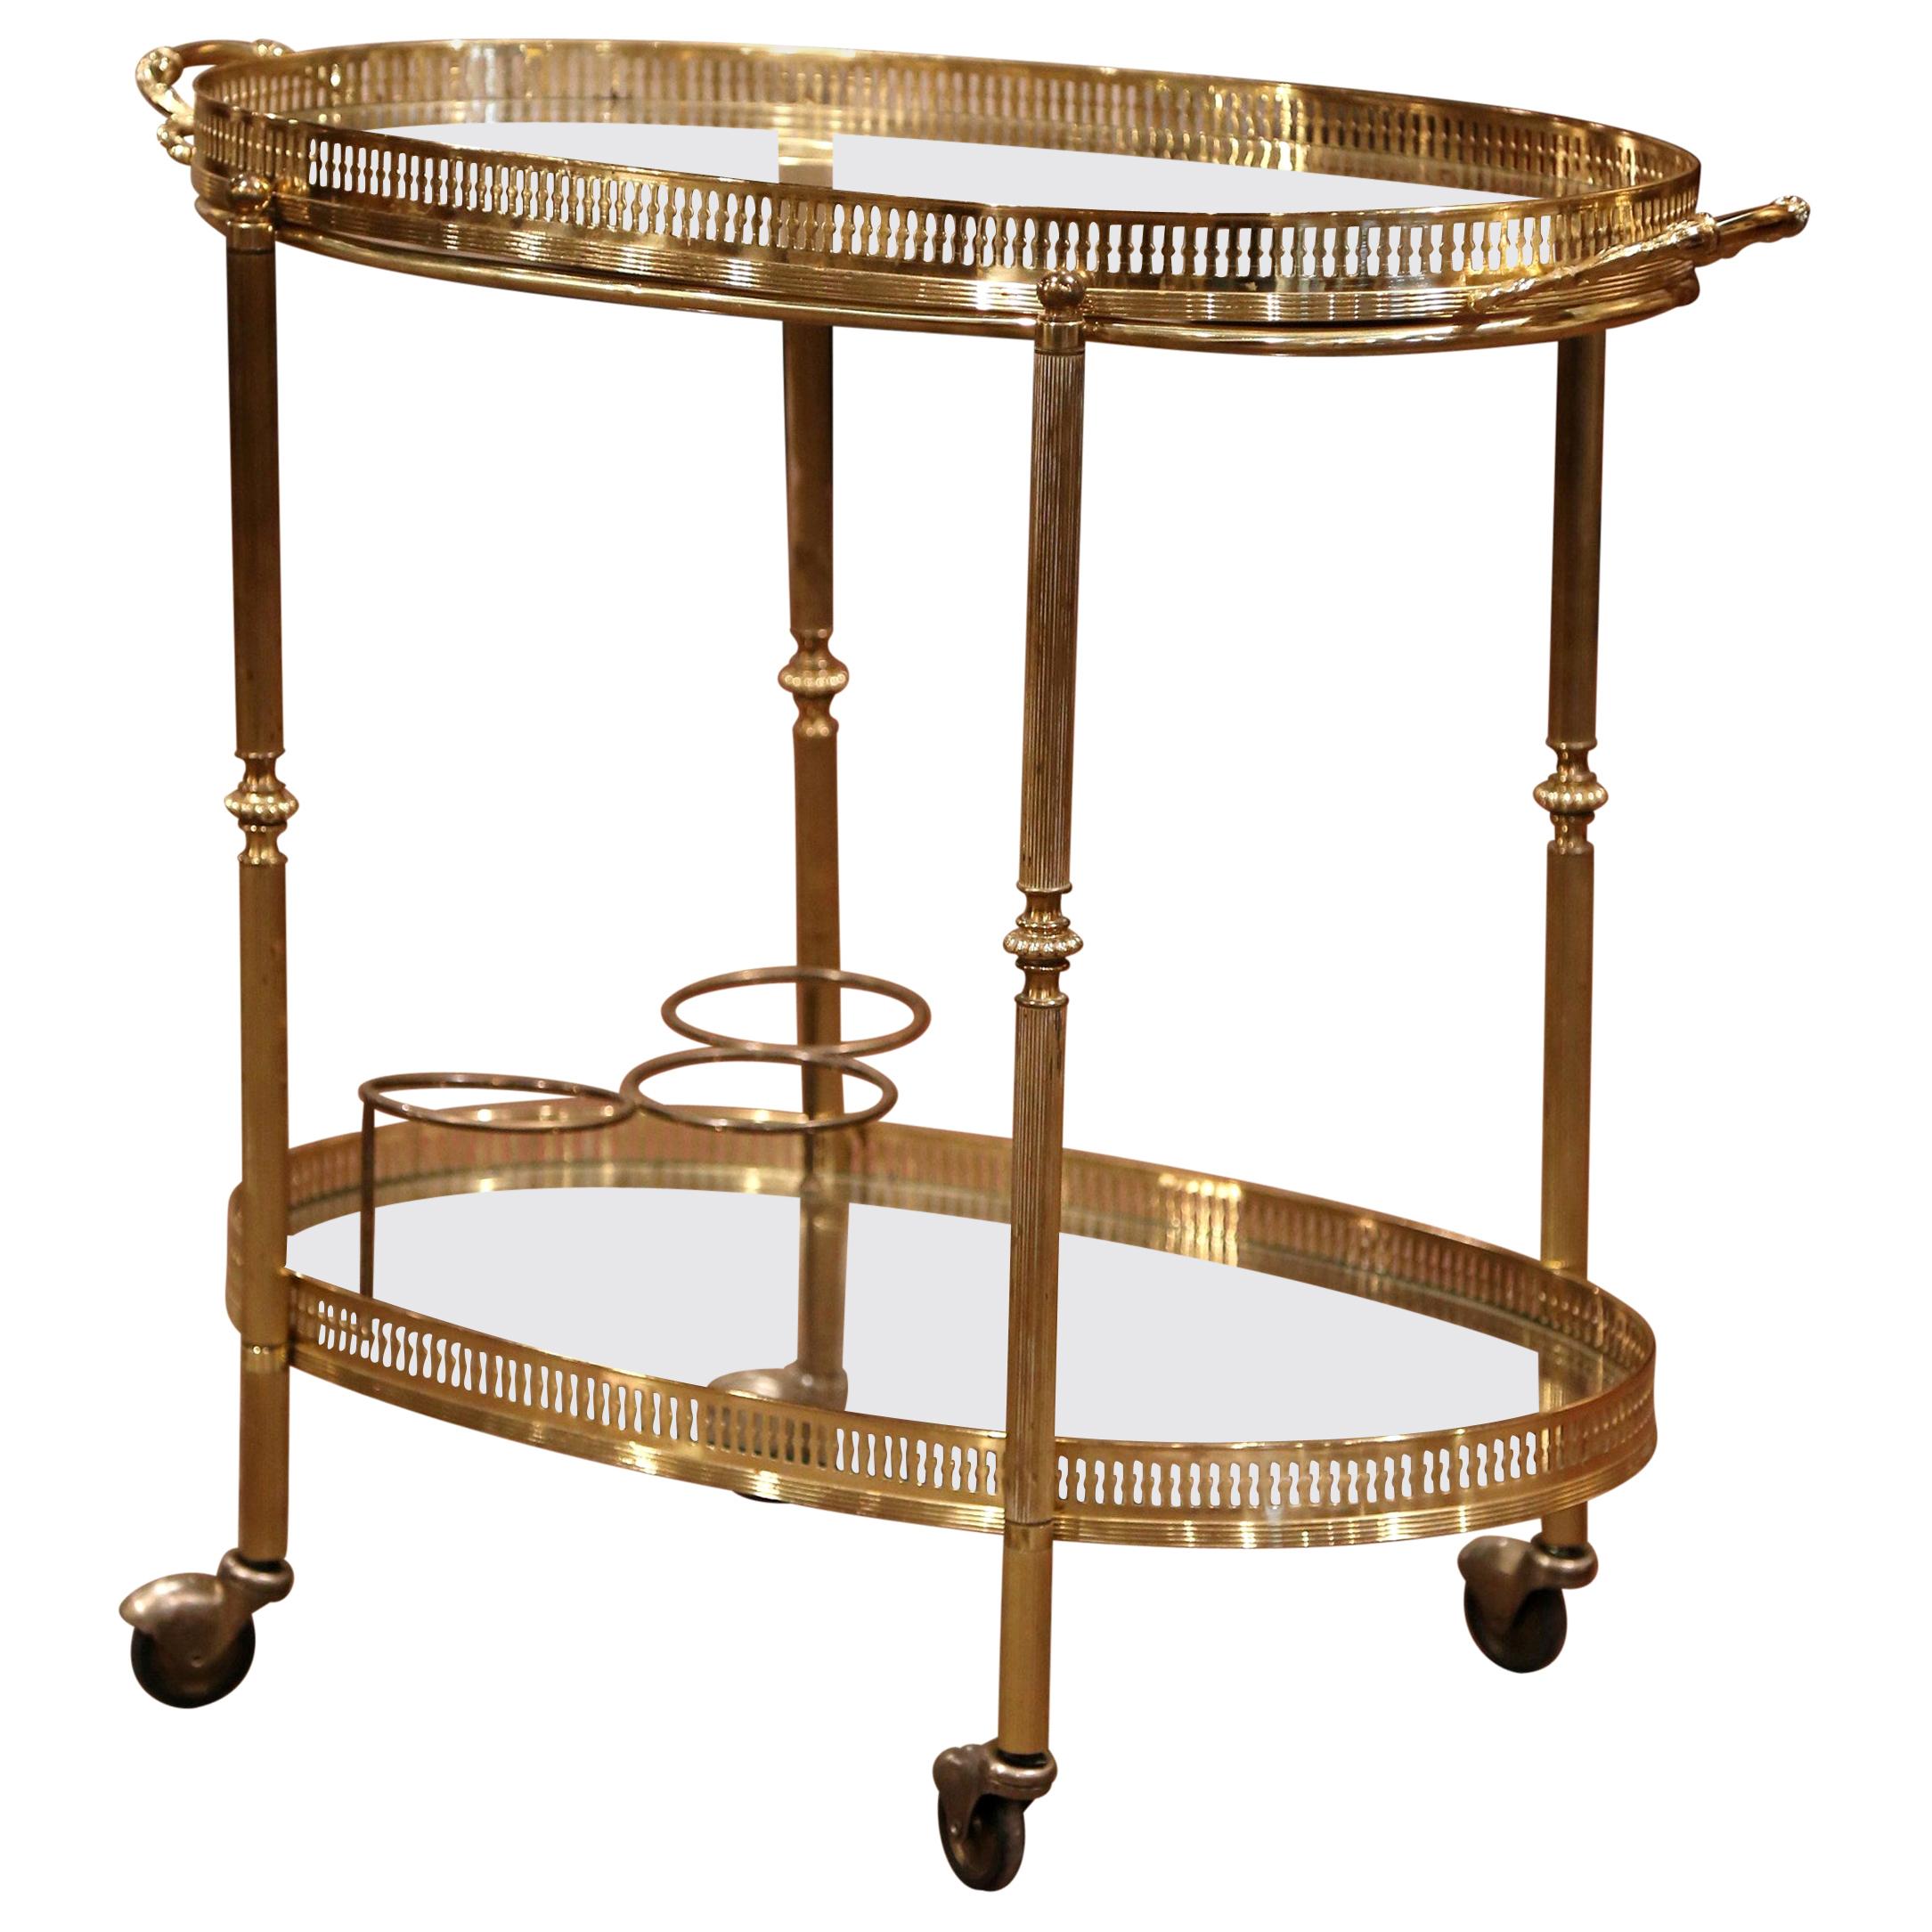 Early 20th Century French Polished Brass Two-Tier Oval Bar Cart on Wheels